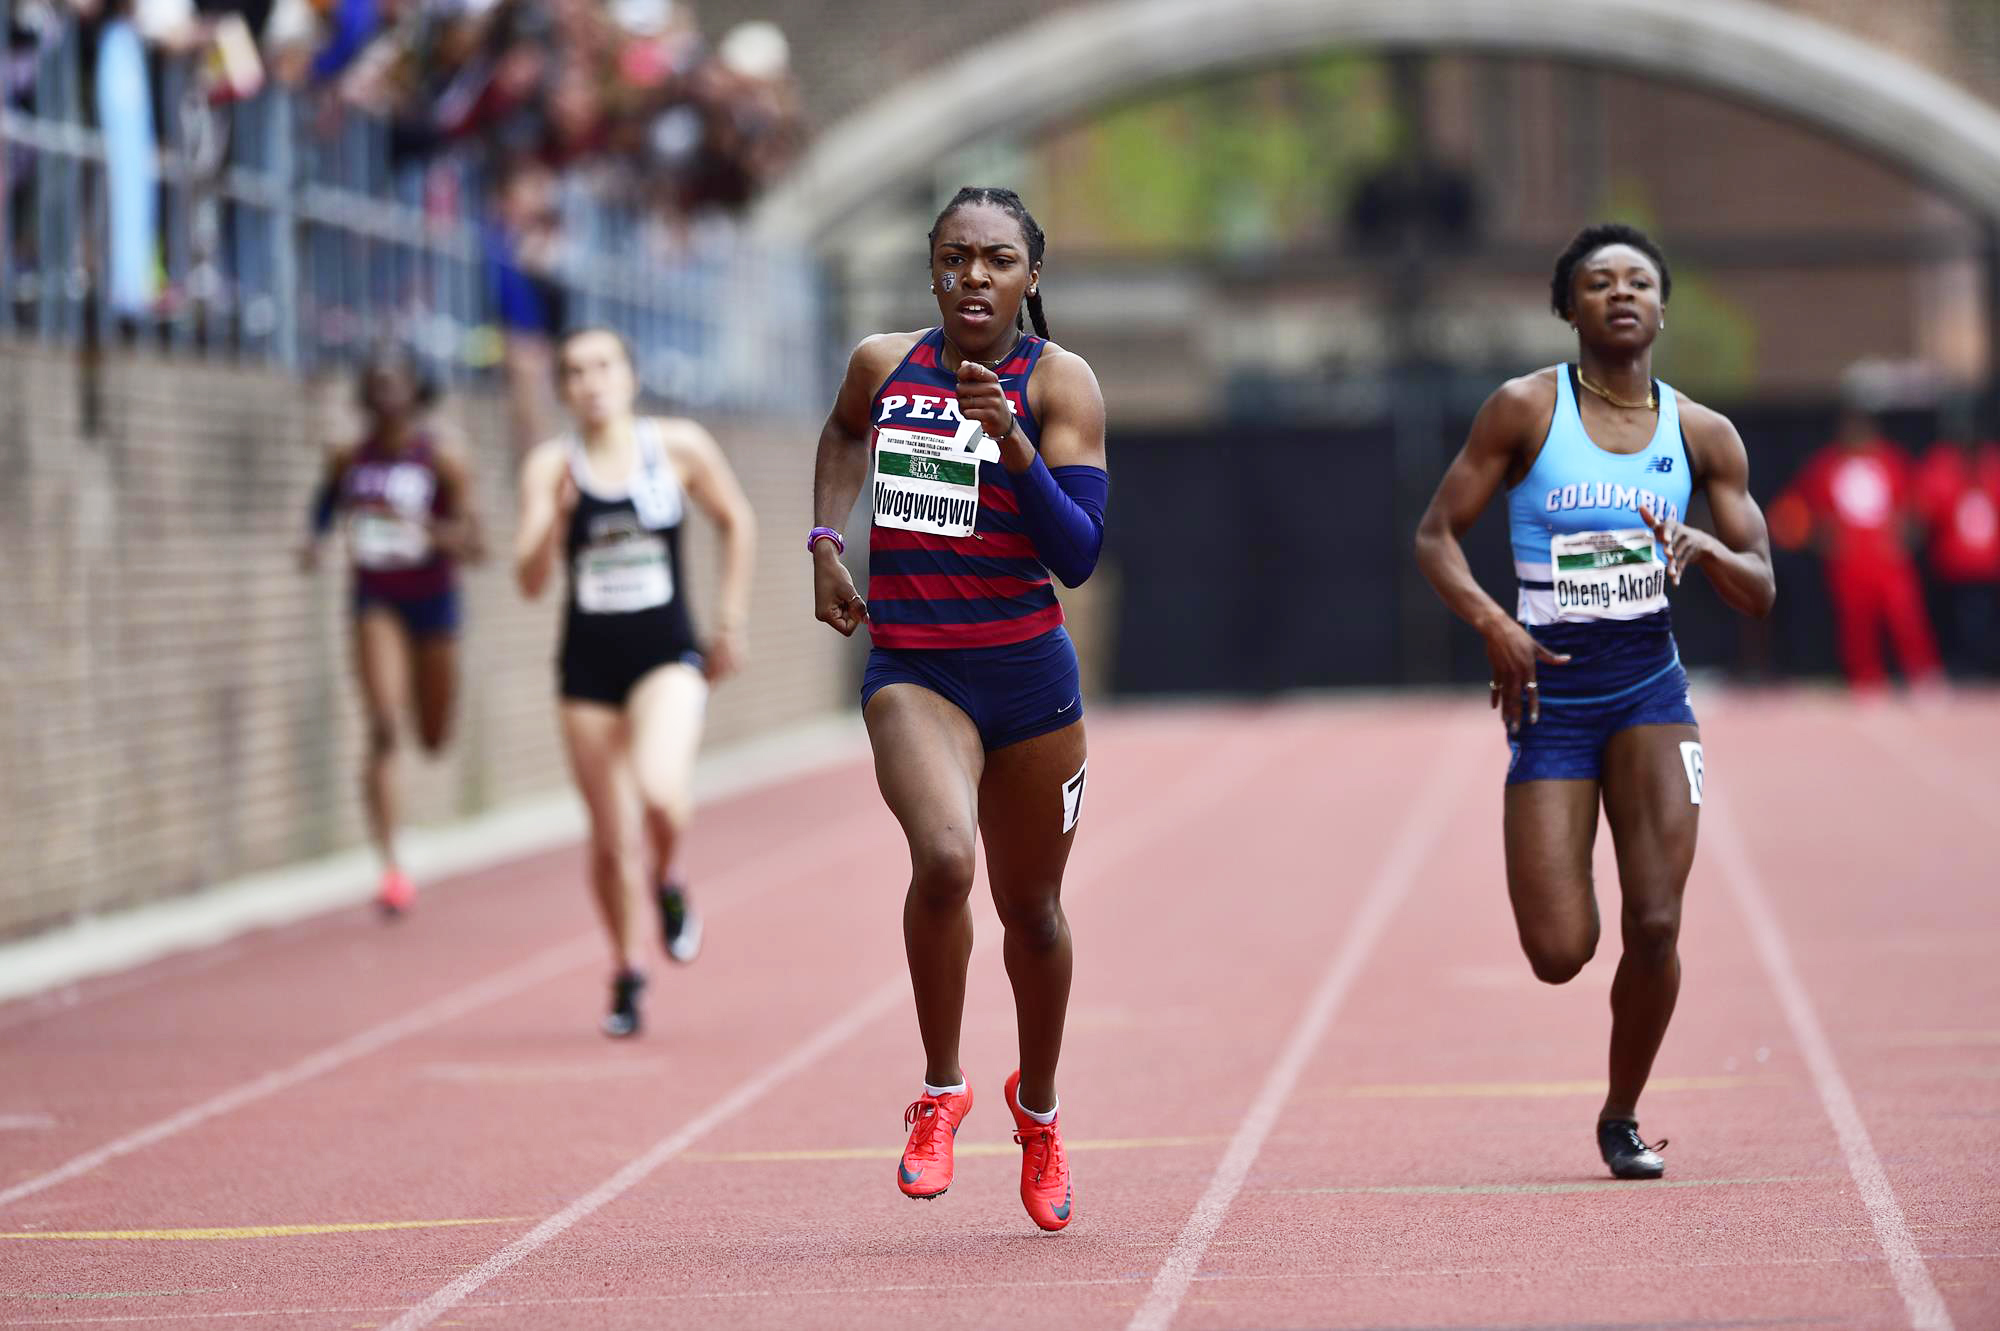 The top 10 women's track and field performances from the season's